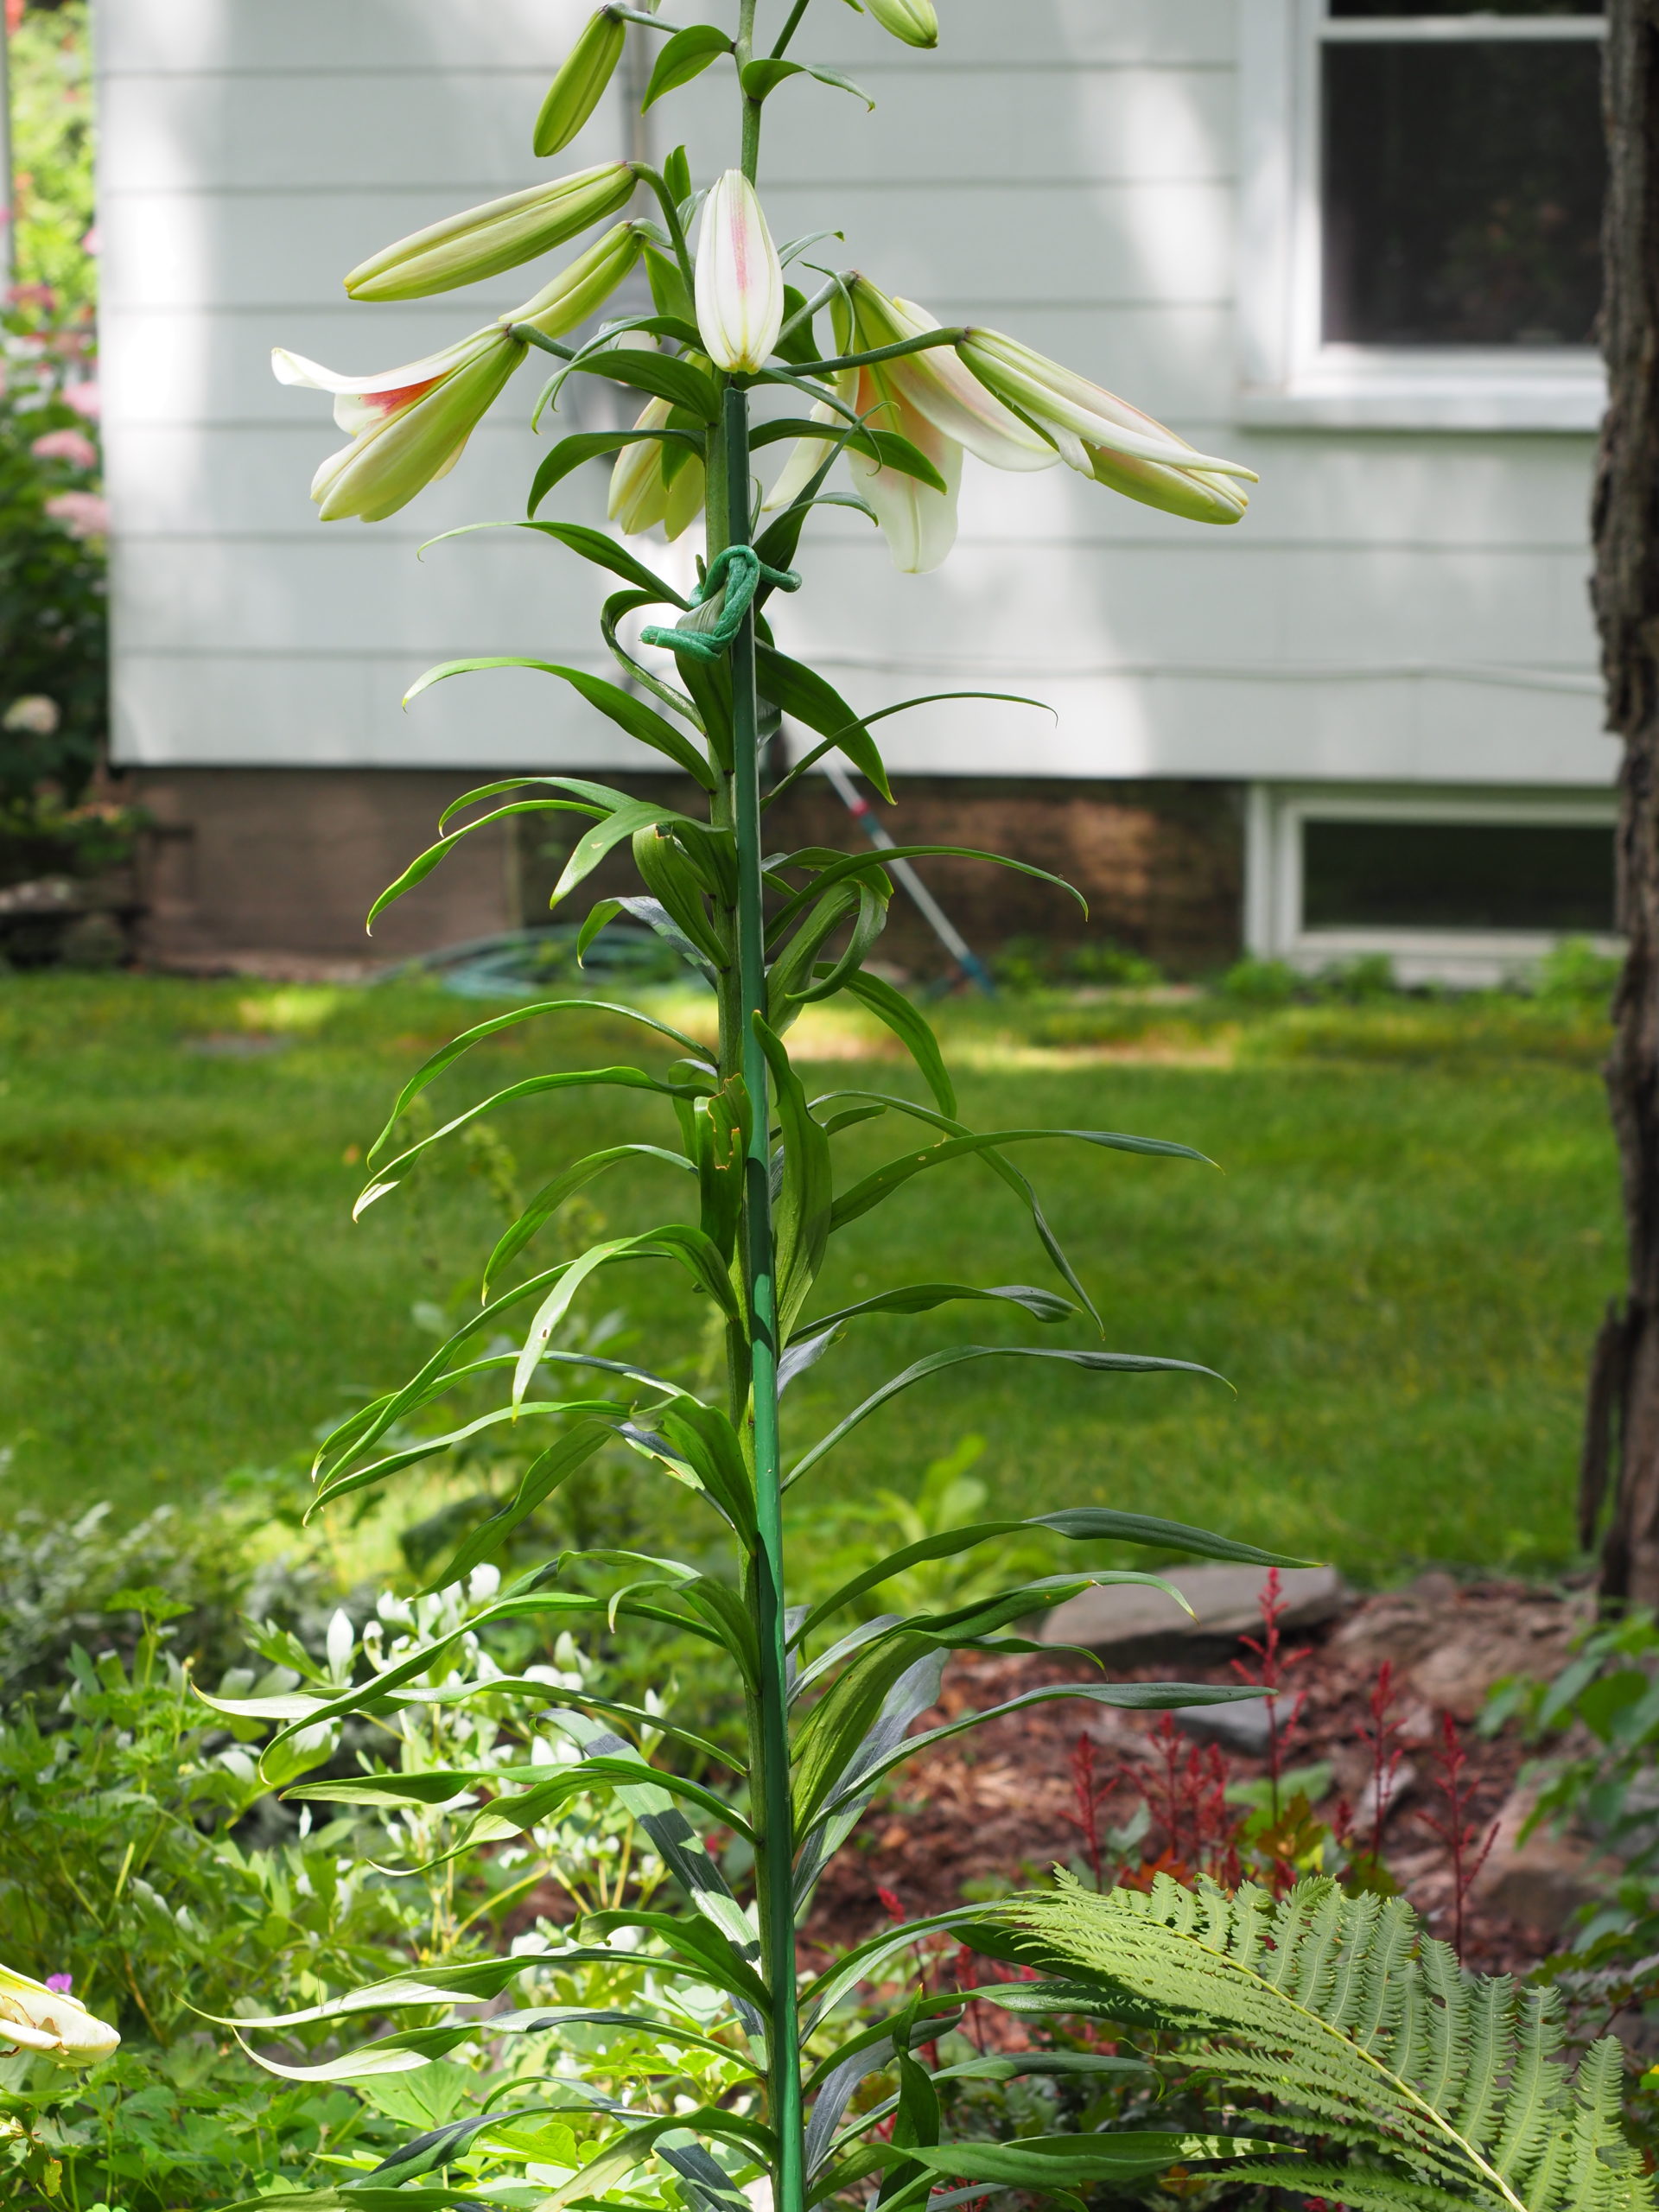 A stake for a 7-foot-tall lily needs to be strong and invisible. Look carefully and you’ll see the Takiron stake parallel to the stem and a soft foam tie just below the unopened center flower bud.